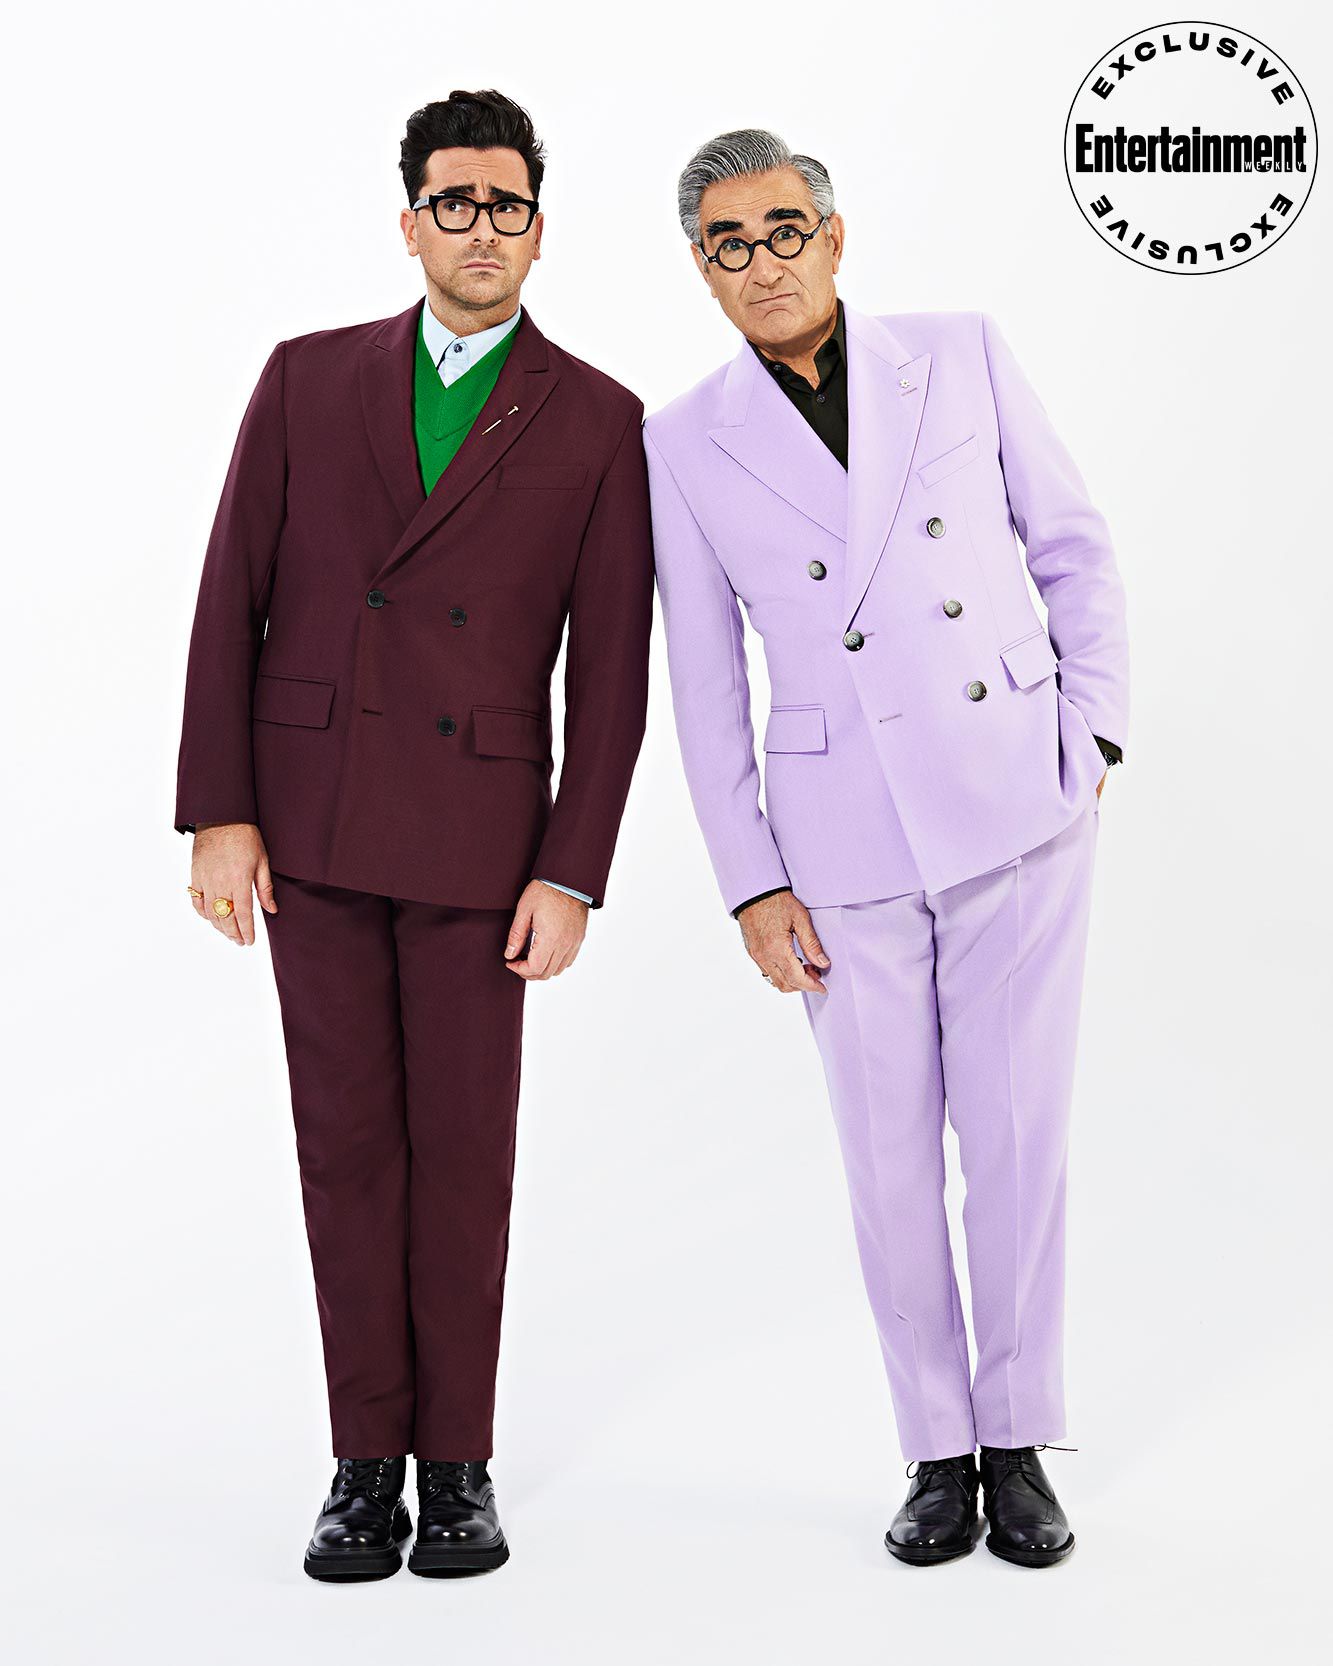 Dan and Eugene Levy are two of EW's Entertainers of the Year 